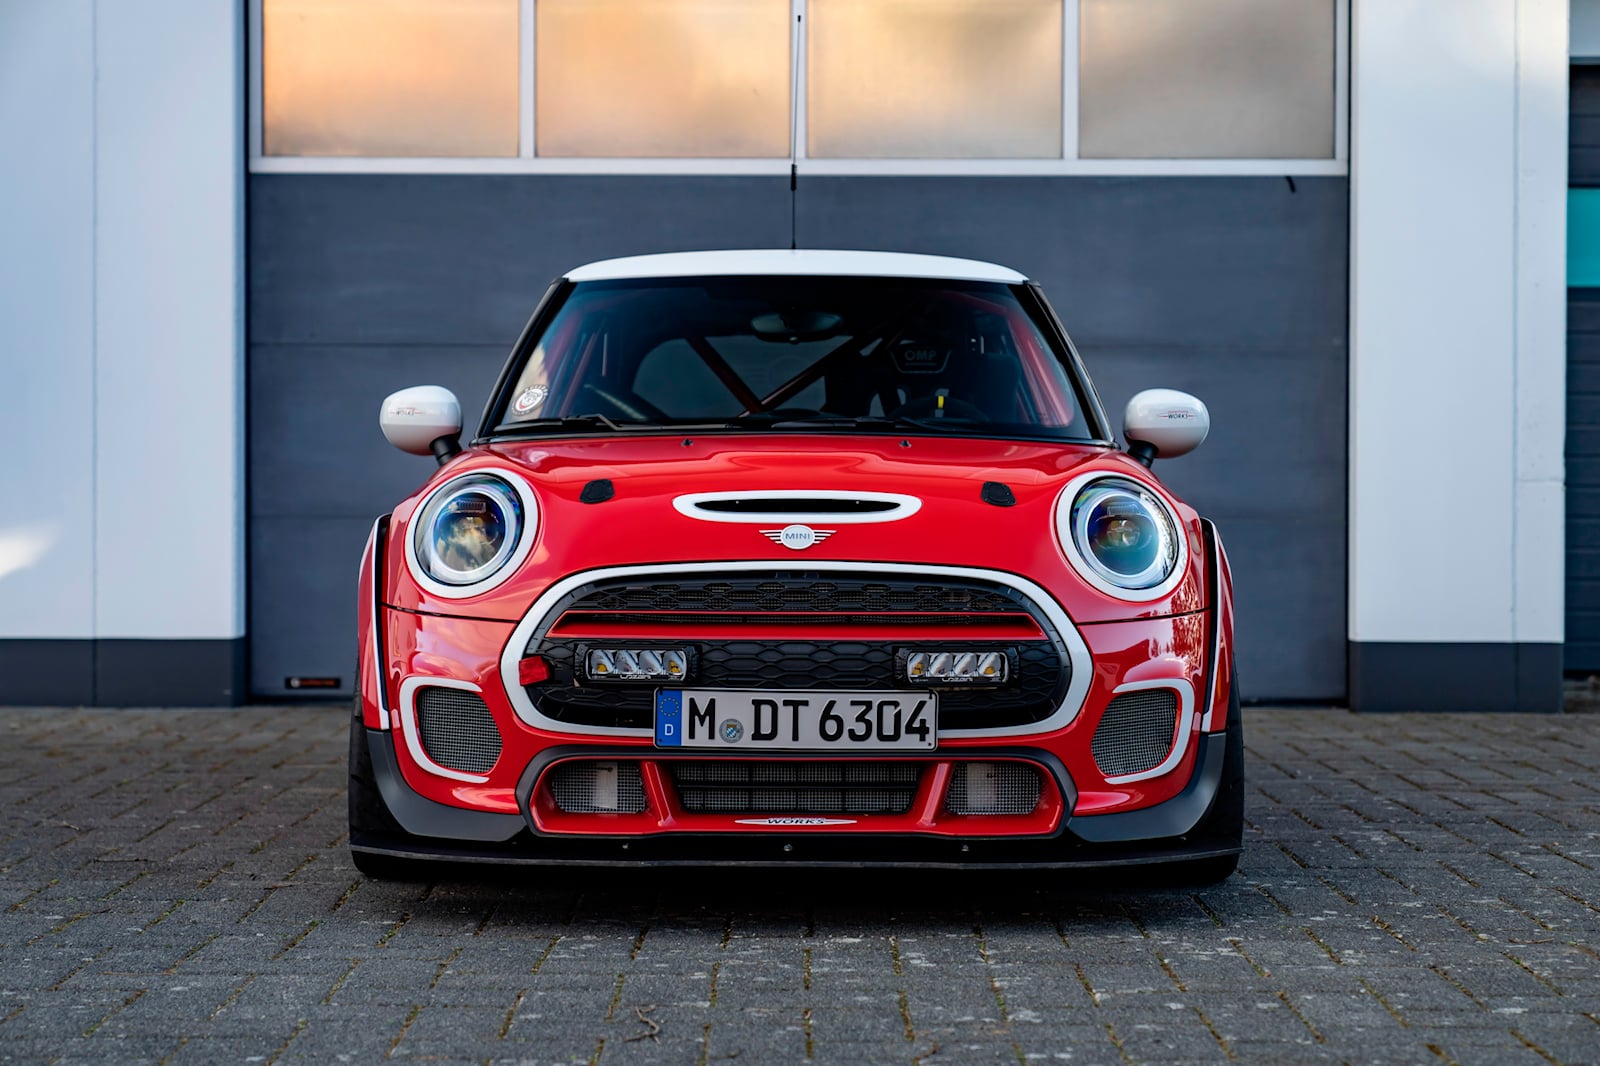 Mini Returning To Nurburgring 24 Hours With This JCW Racer | CarBuzz